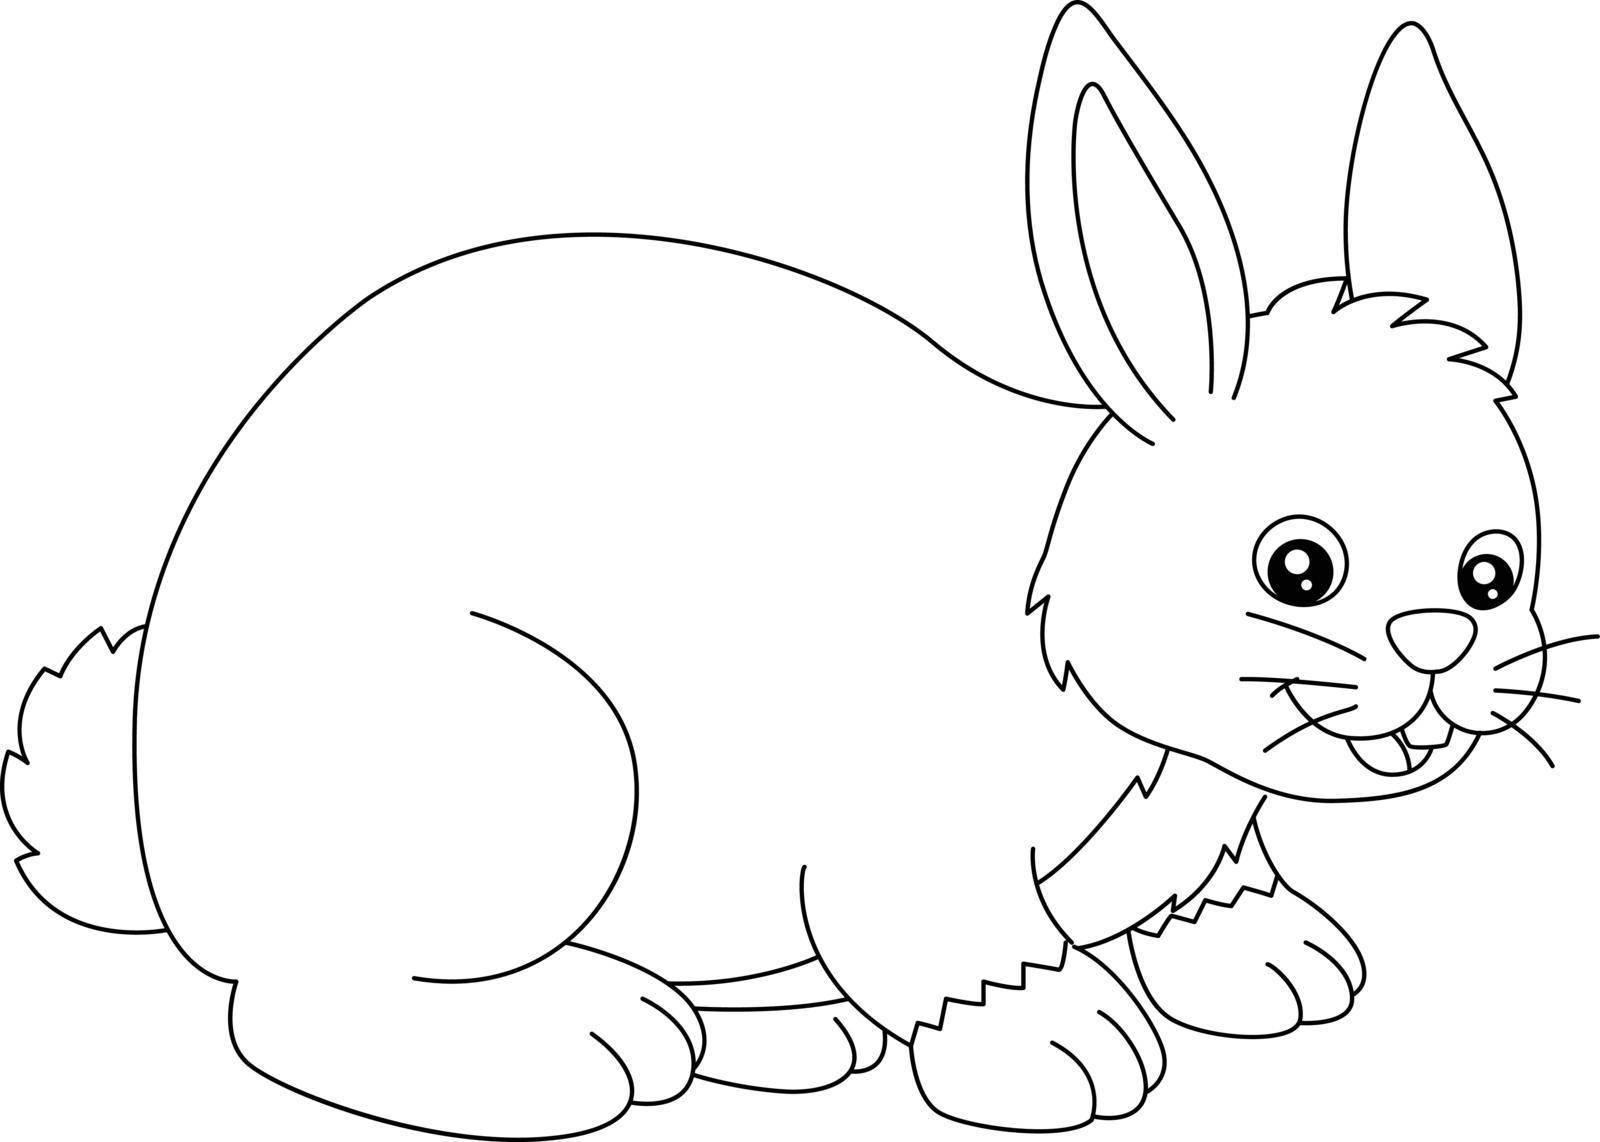 A cute and funny coloring page of bunnies or bunny rabbits. Provides hours of coloring fun for children. To color, this page is very easy. Suitable for little kids and toddlers.